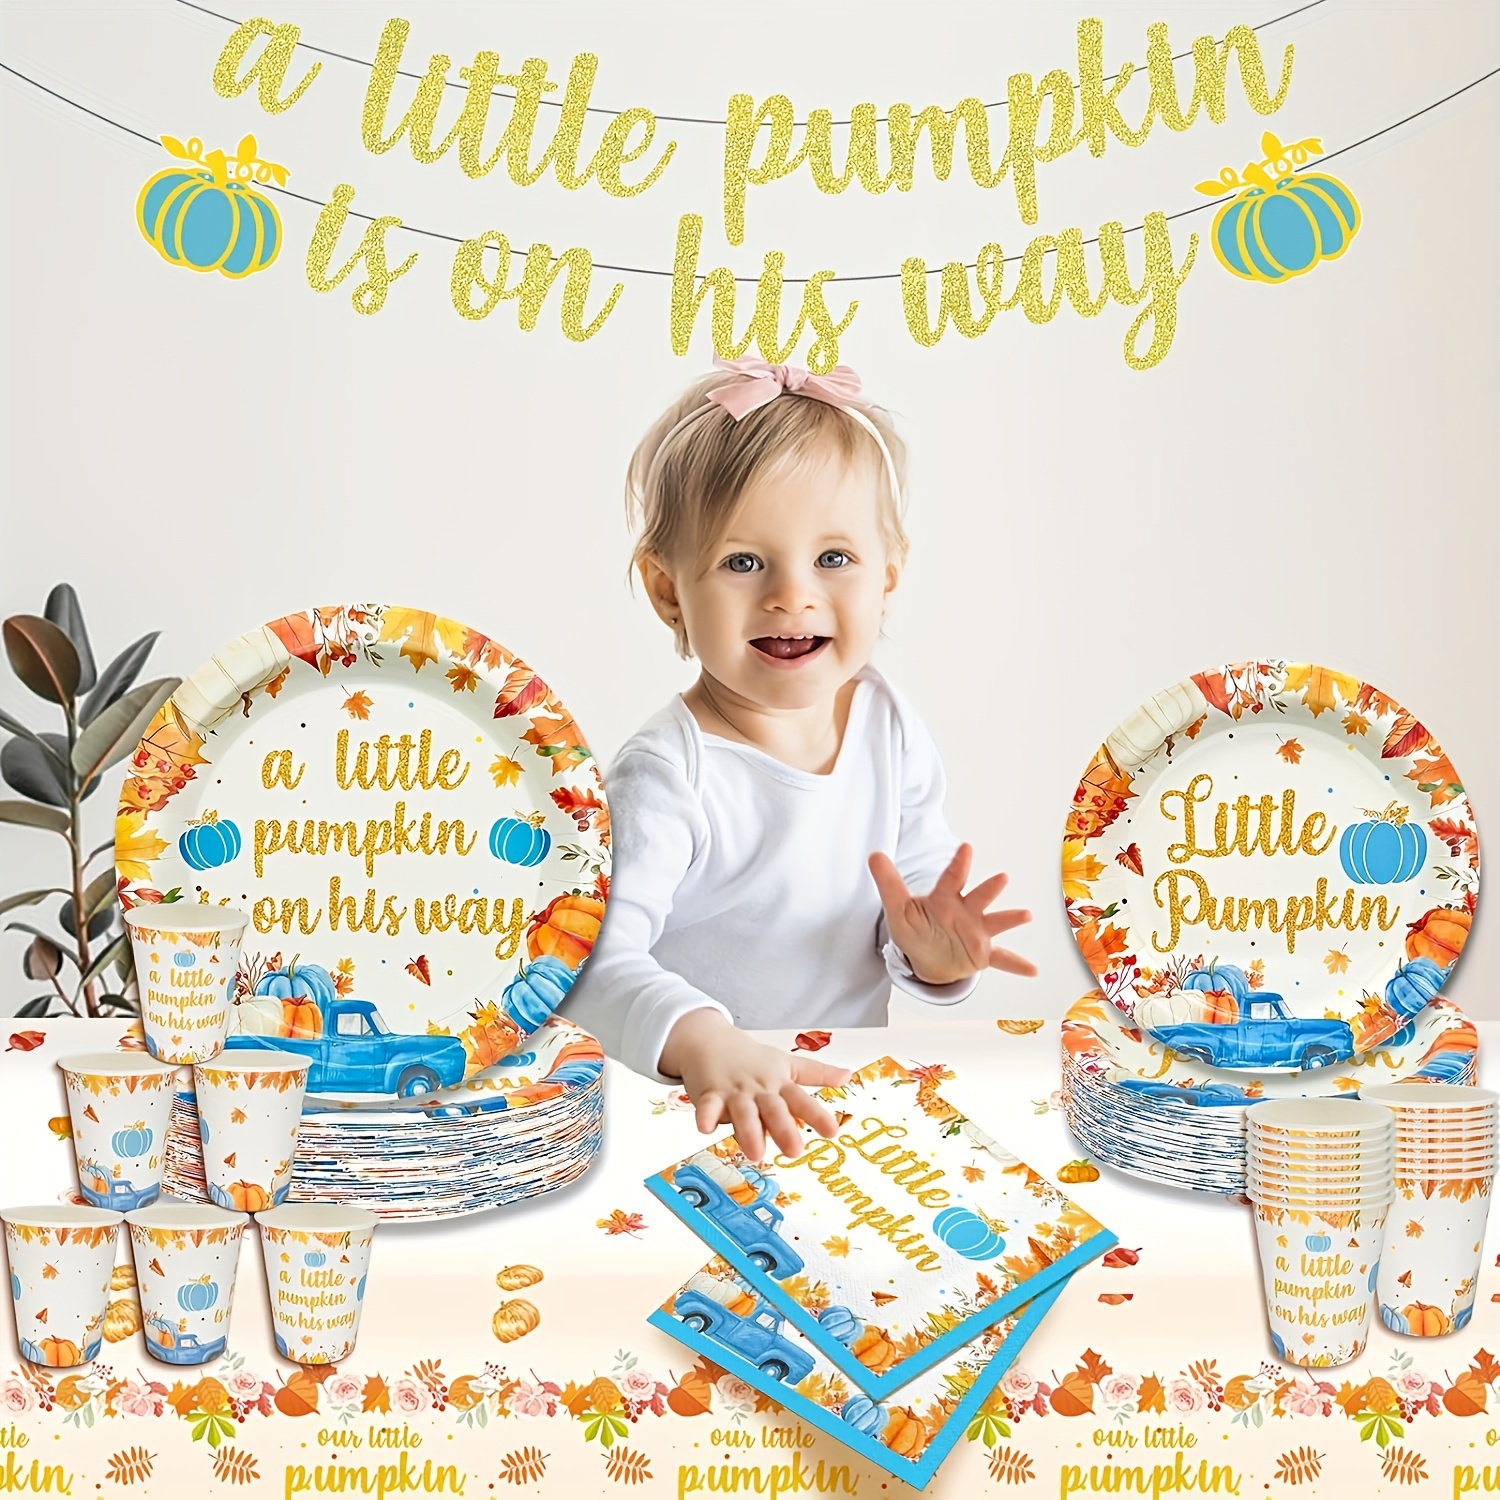 

170pcs A Little Pumpkin Is On His Way Baby Shower Party Decorations Little Pumpkin Baby Shower Decorations Boy A Little Pumpkin Is On The Way Baby Shower Boy Blue Pumpkin Baby Shower Decorations